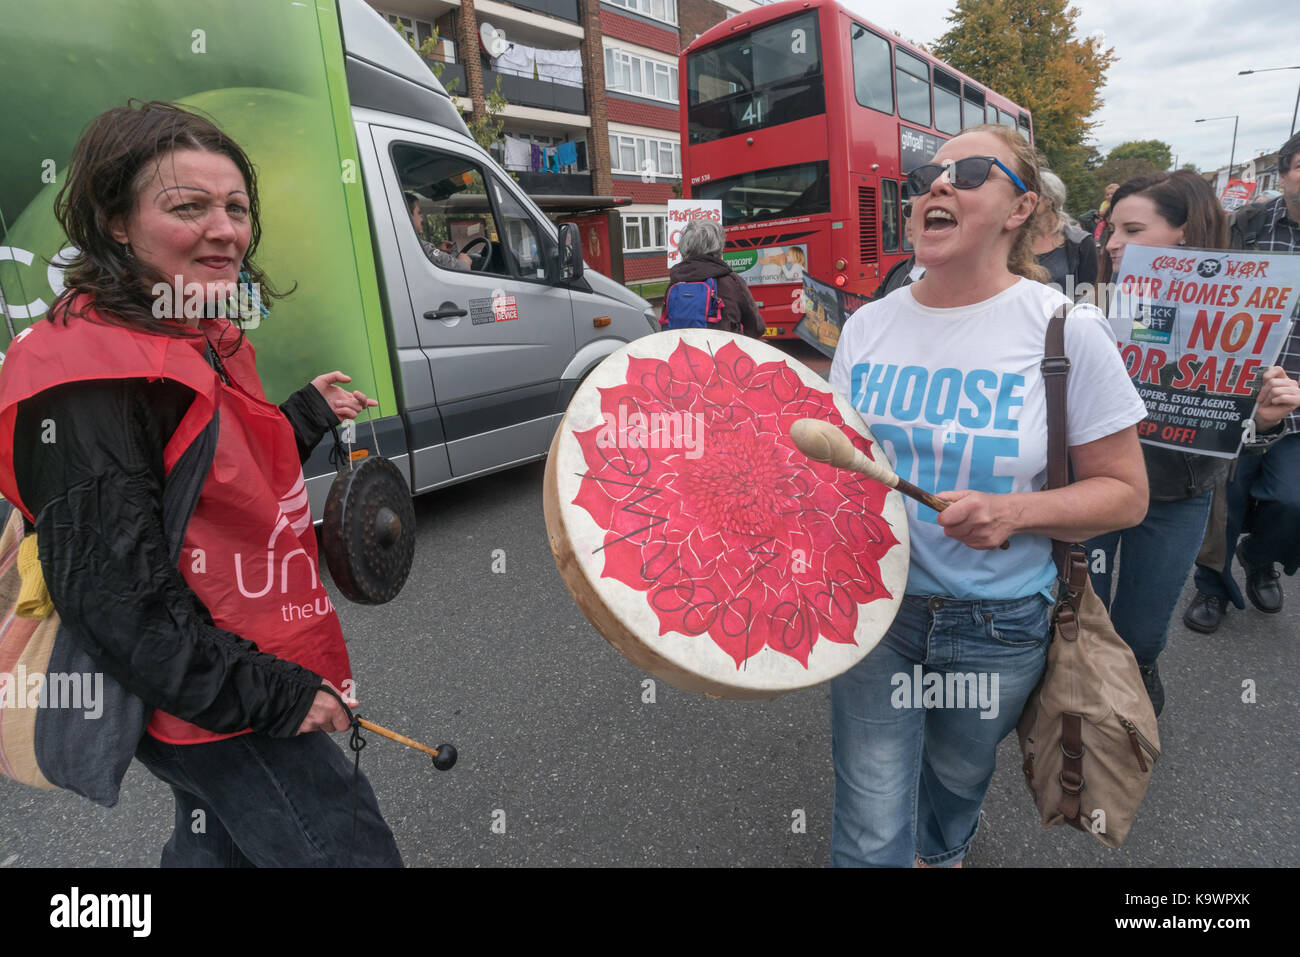 London, UK. 23rd Sep, 2017. London, UK. 23rd September 2017. Two women with drums on the march in North London from a rally in Tottenham to Finsbury Park against the so called Haringey Development Vehicle, under which Haringey Council is making a huge transfer of council housing to Australian multinational Lendlease. This will result in the imminent demolition of over 1,300 council homes on the Northumberland Park estate, followed by similar loss of social housing across the whole of the borough. At Â£2 billion, his is the largest giveaway of council housing and assets to a private corpo Stock Photo